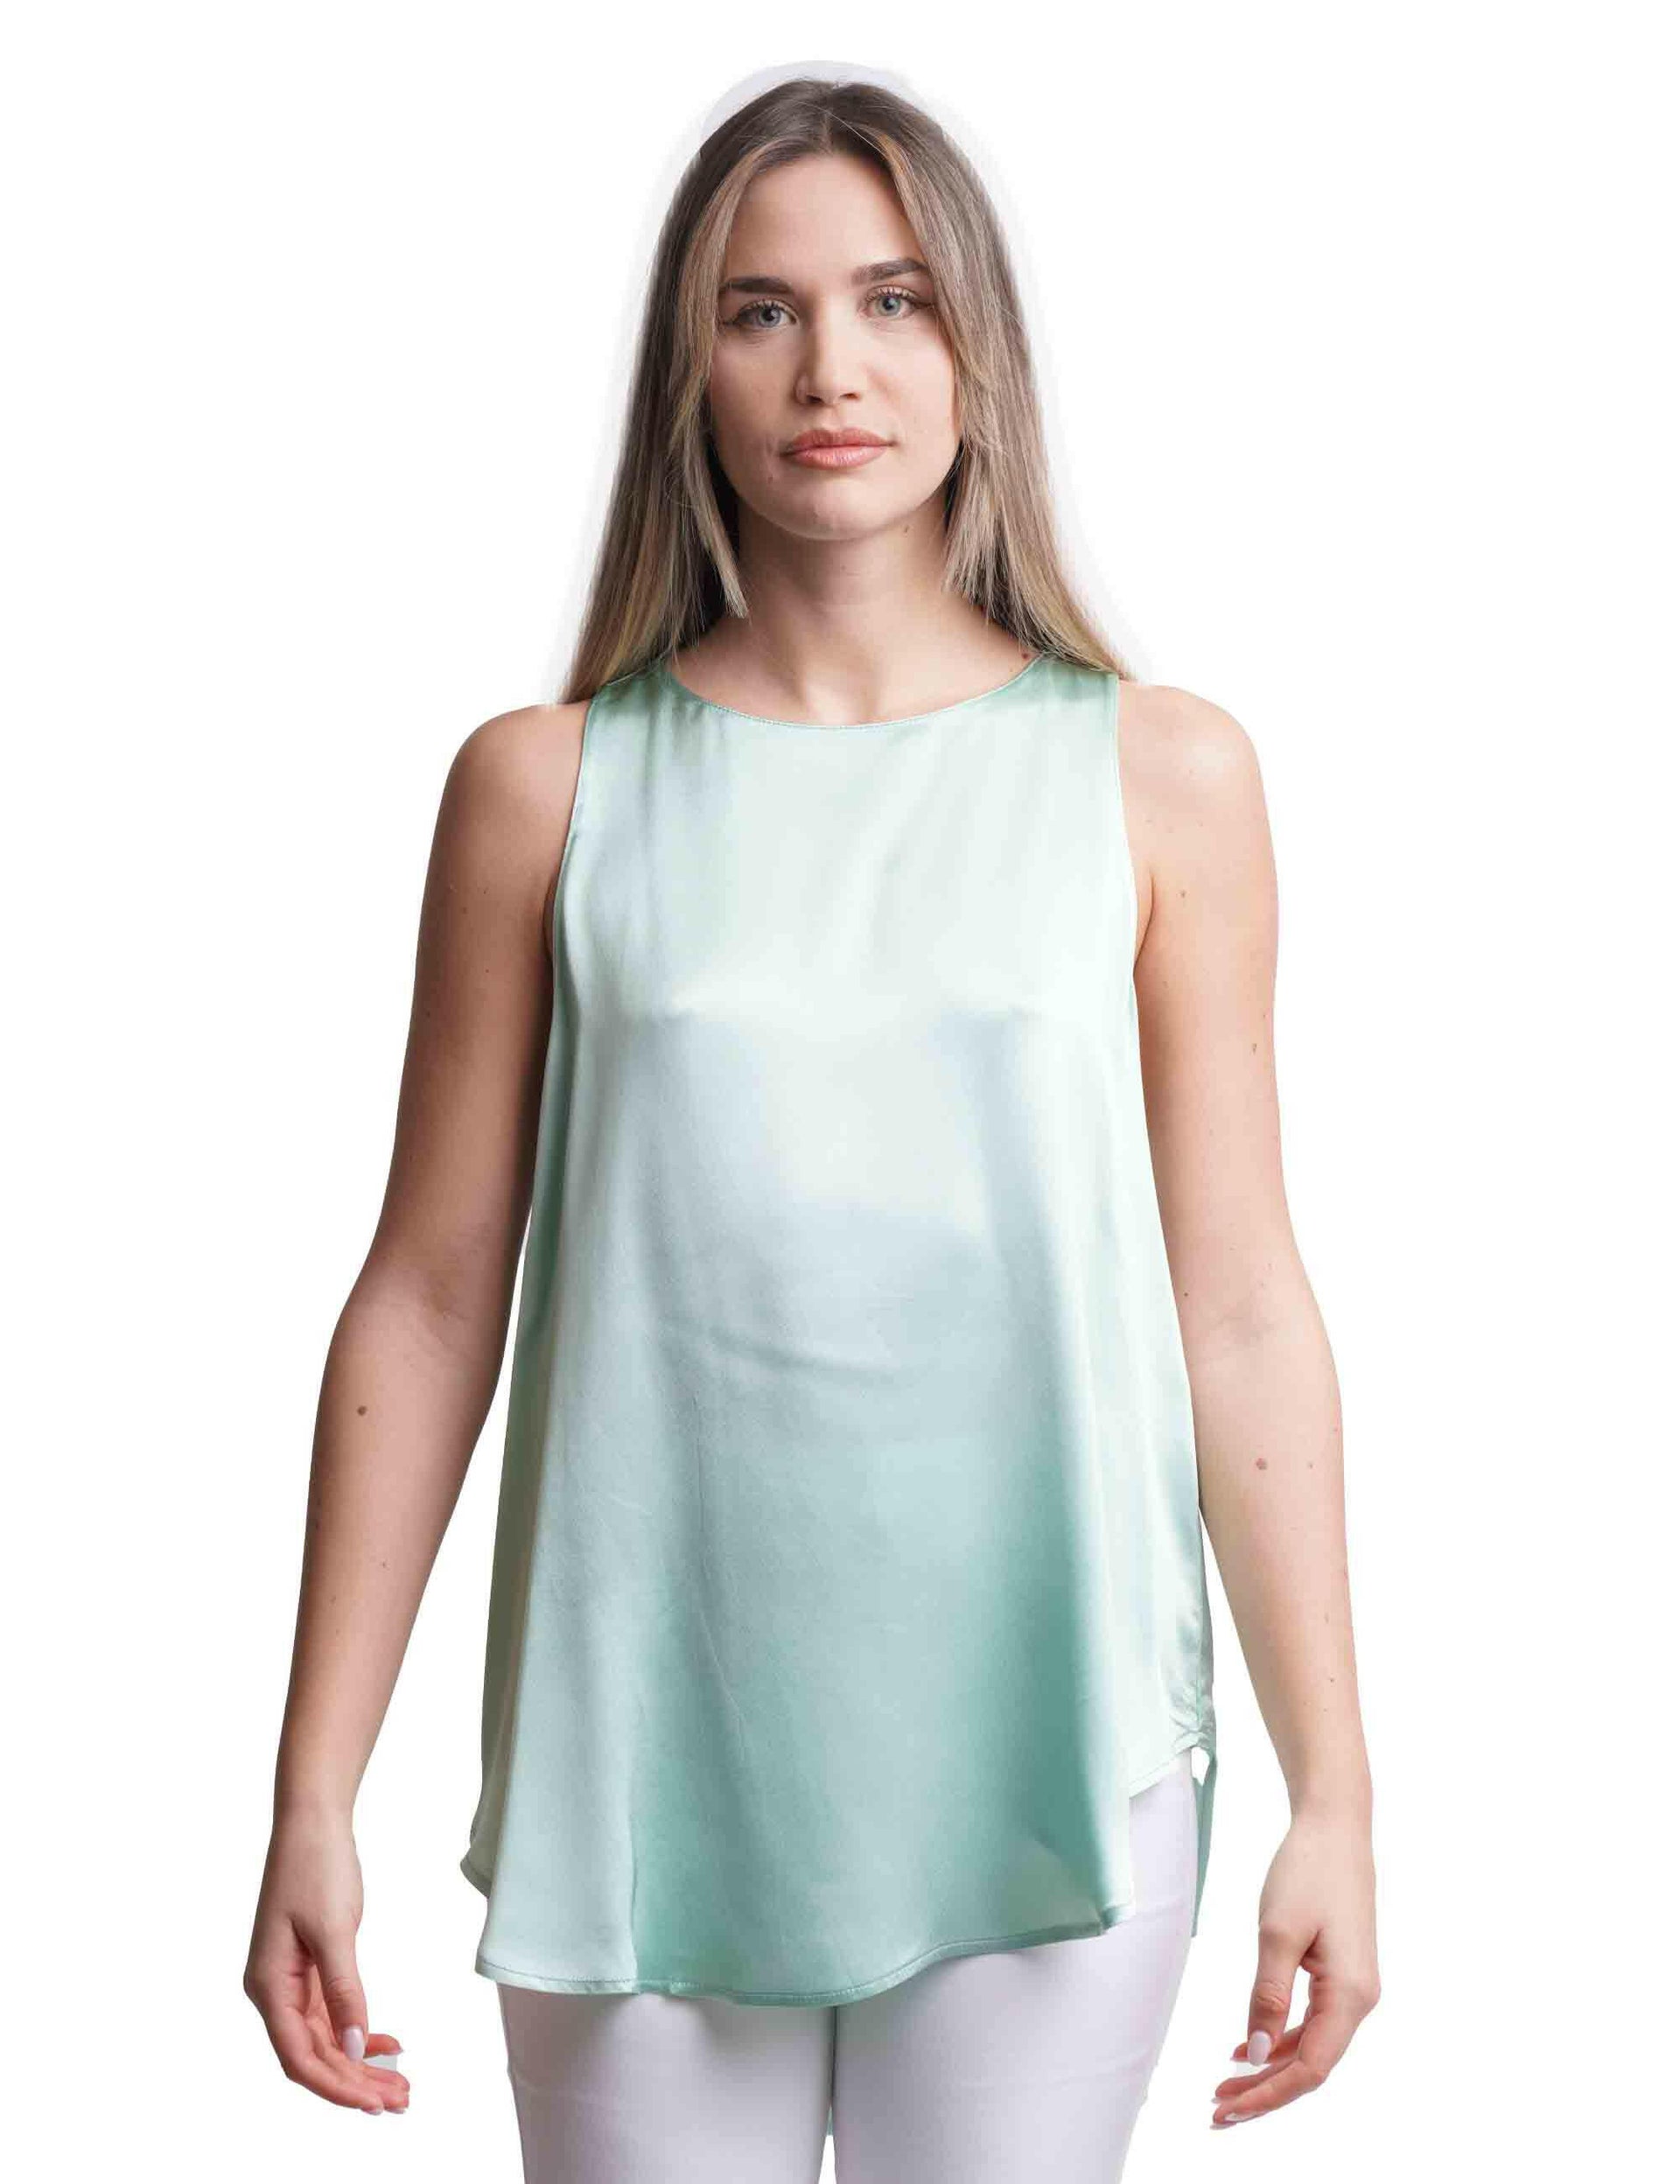 Shiny women's top in green cady with rounded hem